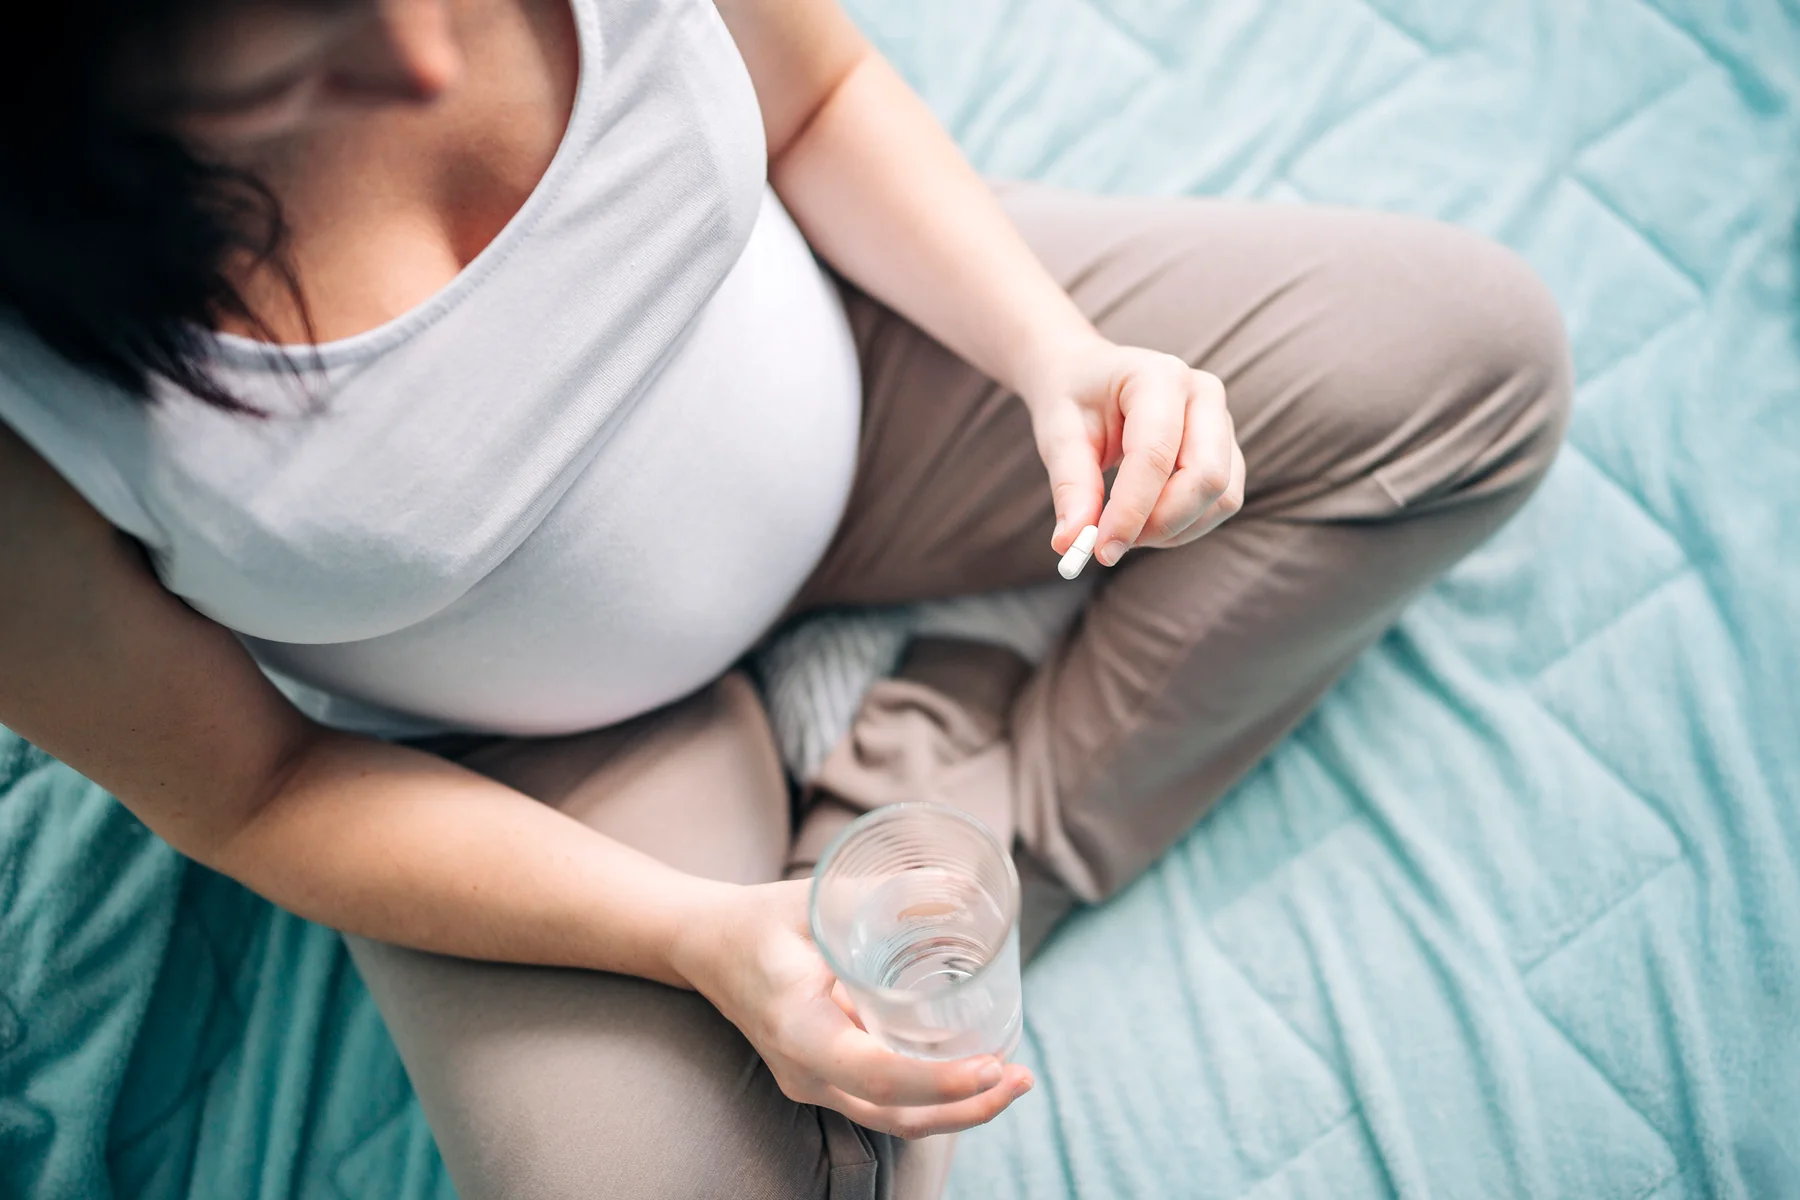 How Should Pregnant Women Supplement Iron Properly?